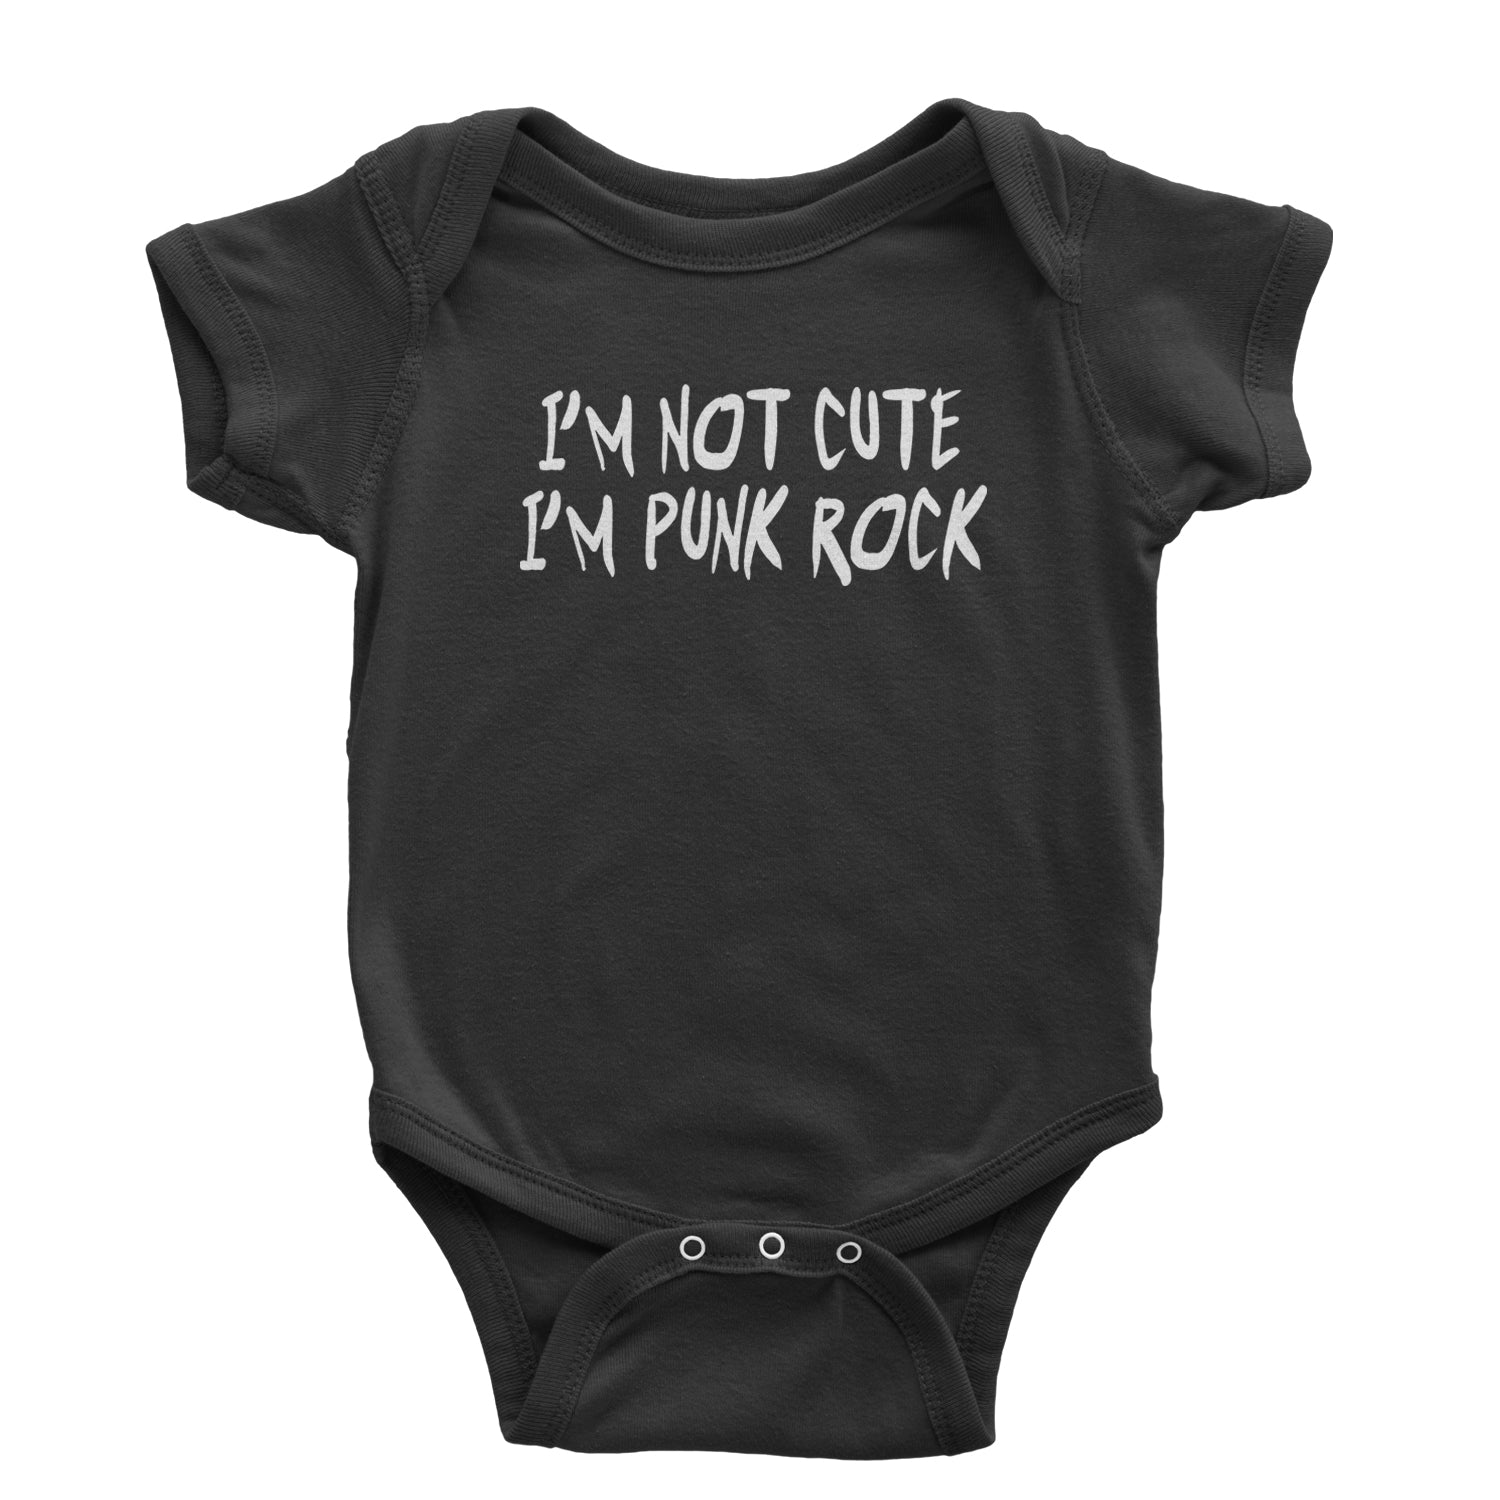 I'm Not Cute, I'm Punk Rock Infant One-Piece Romper Bodysuit and Toddler T-shirt